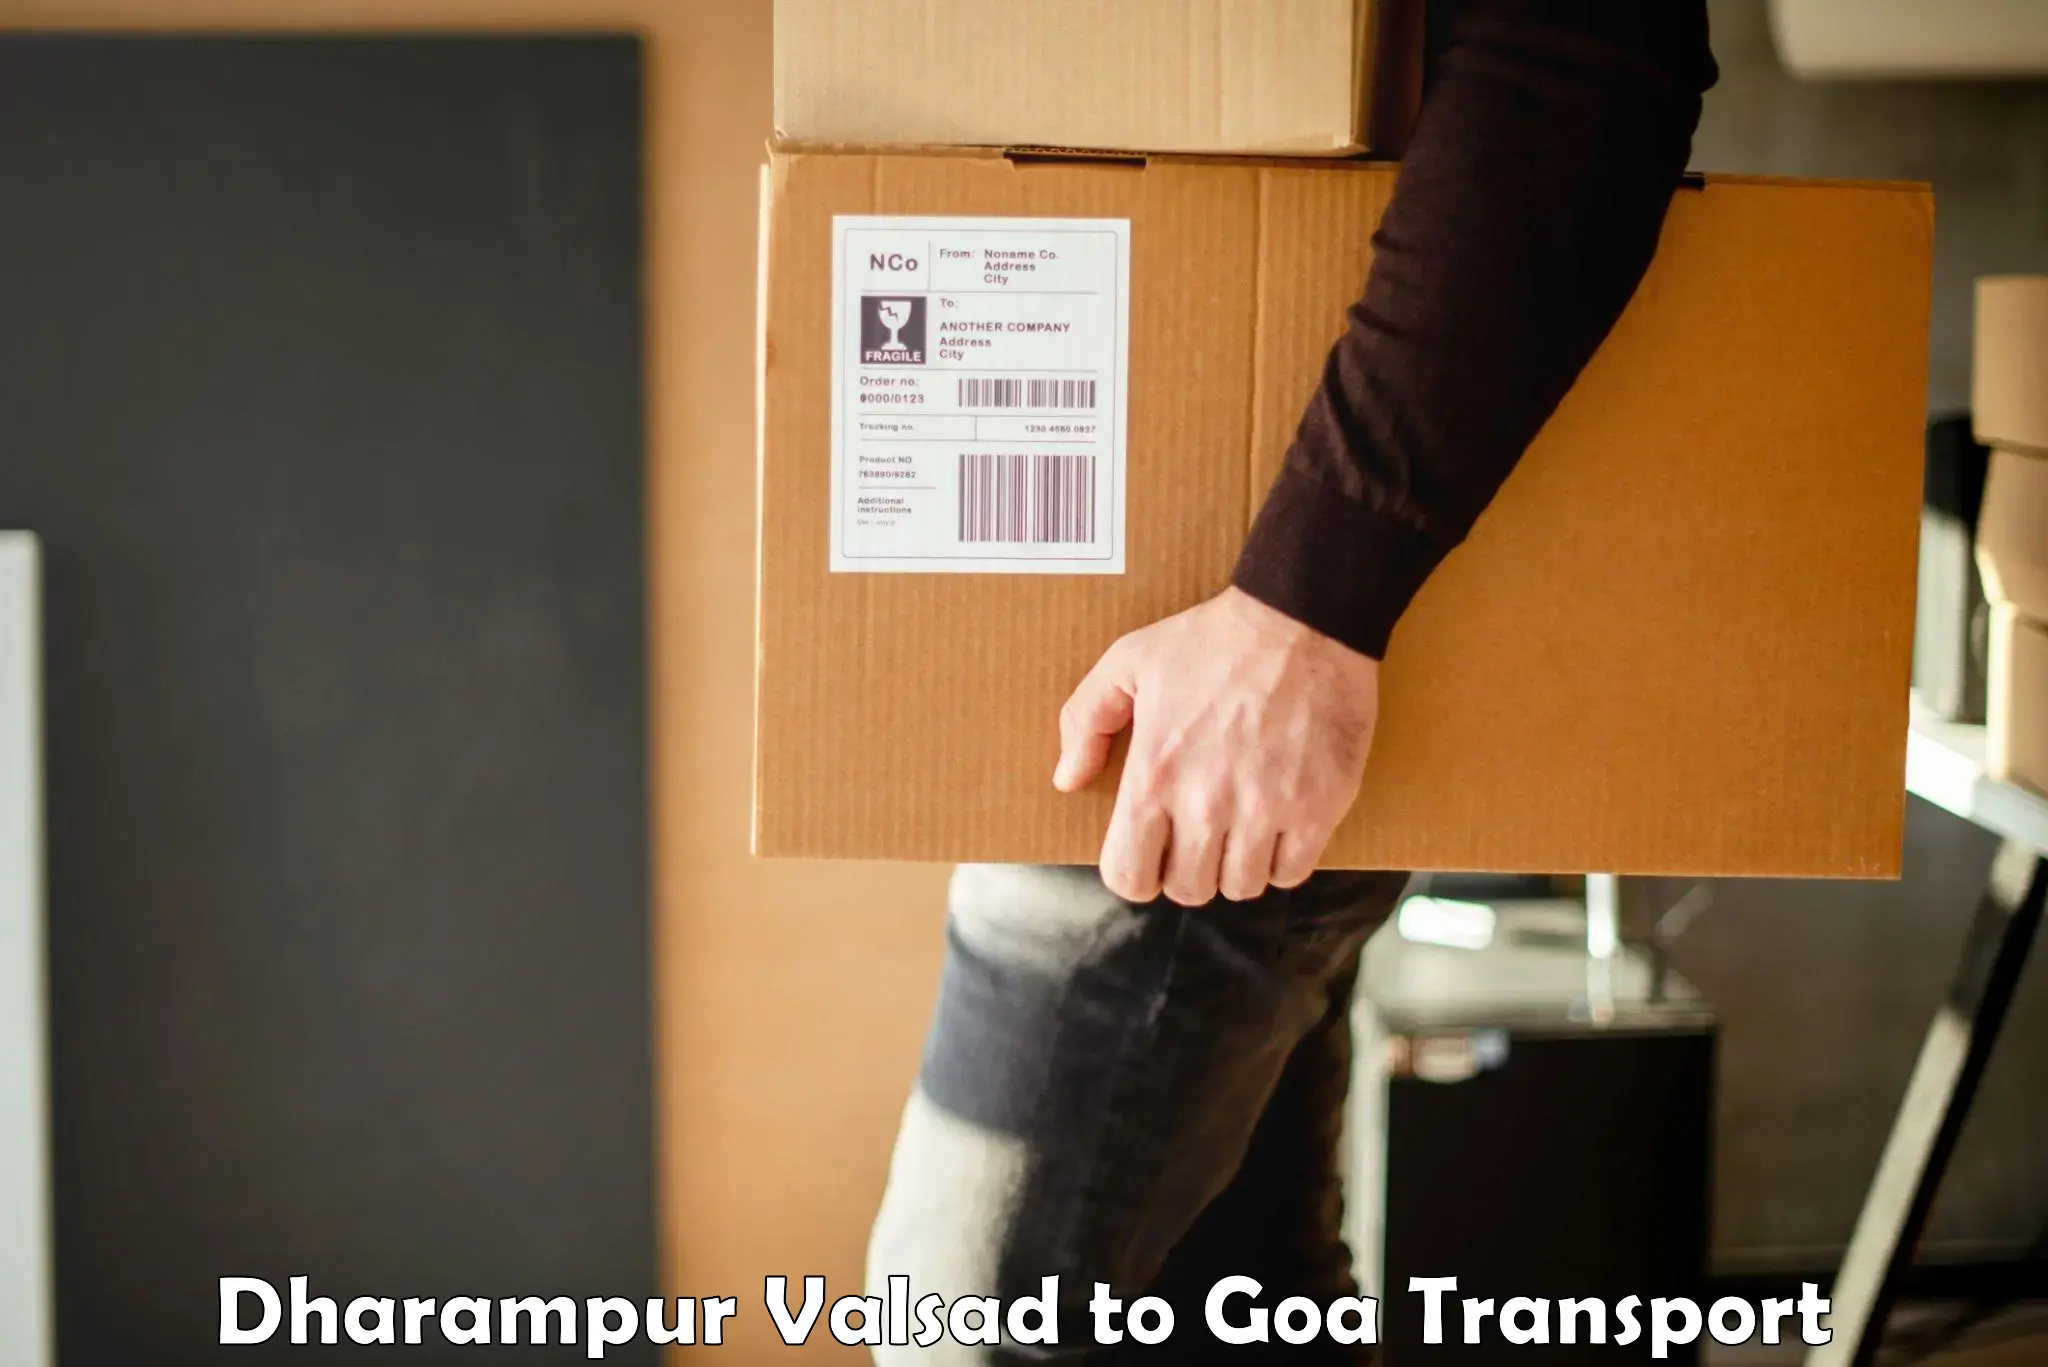 Material transport services Dharampur Valsad to Goa